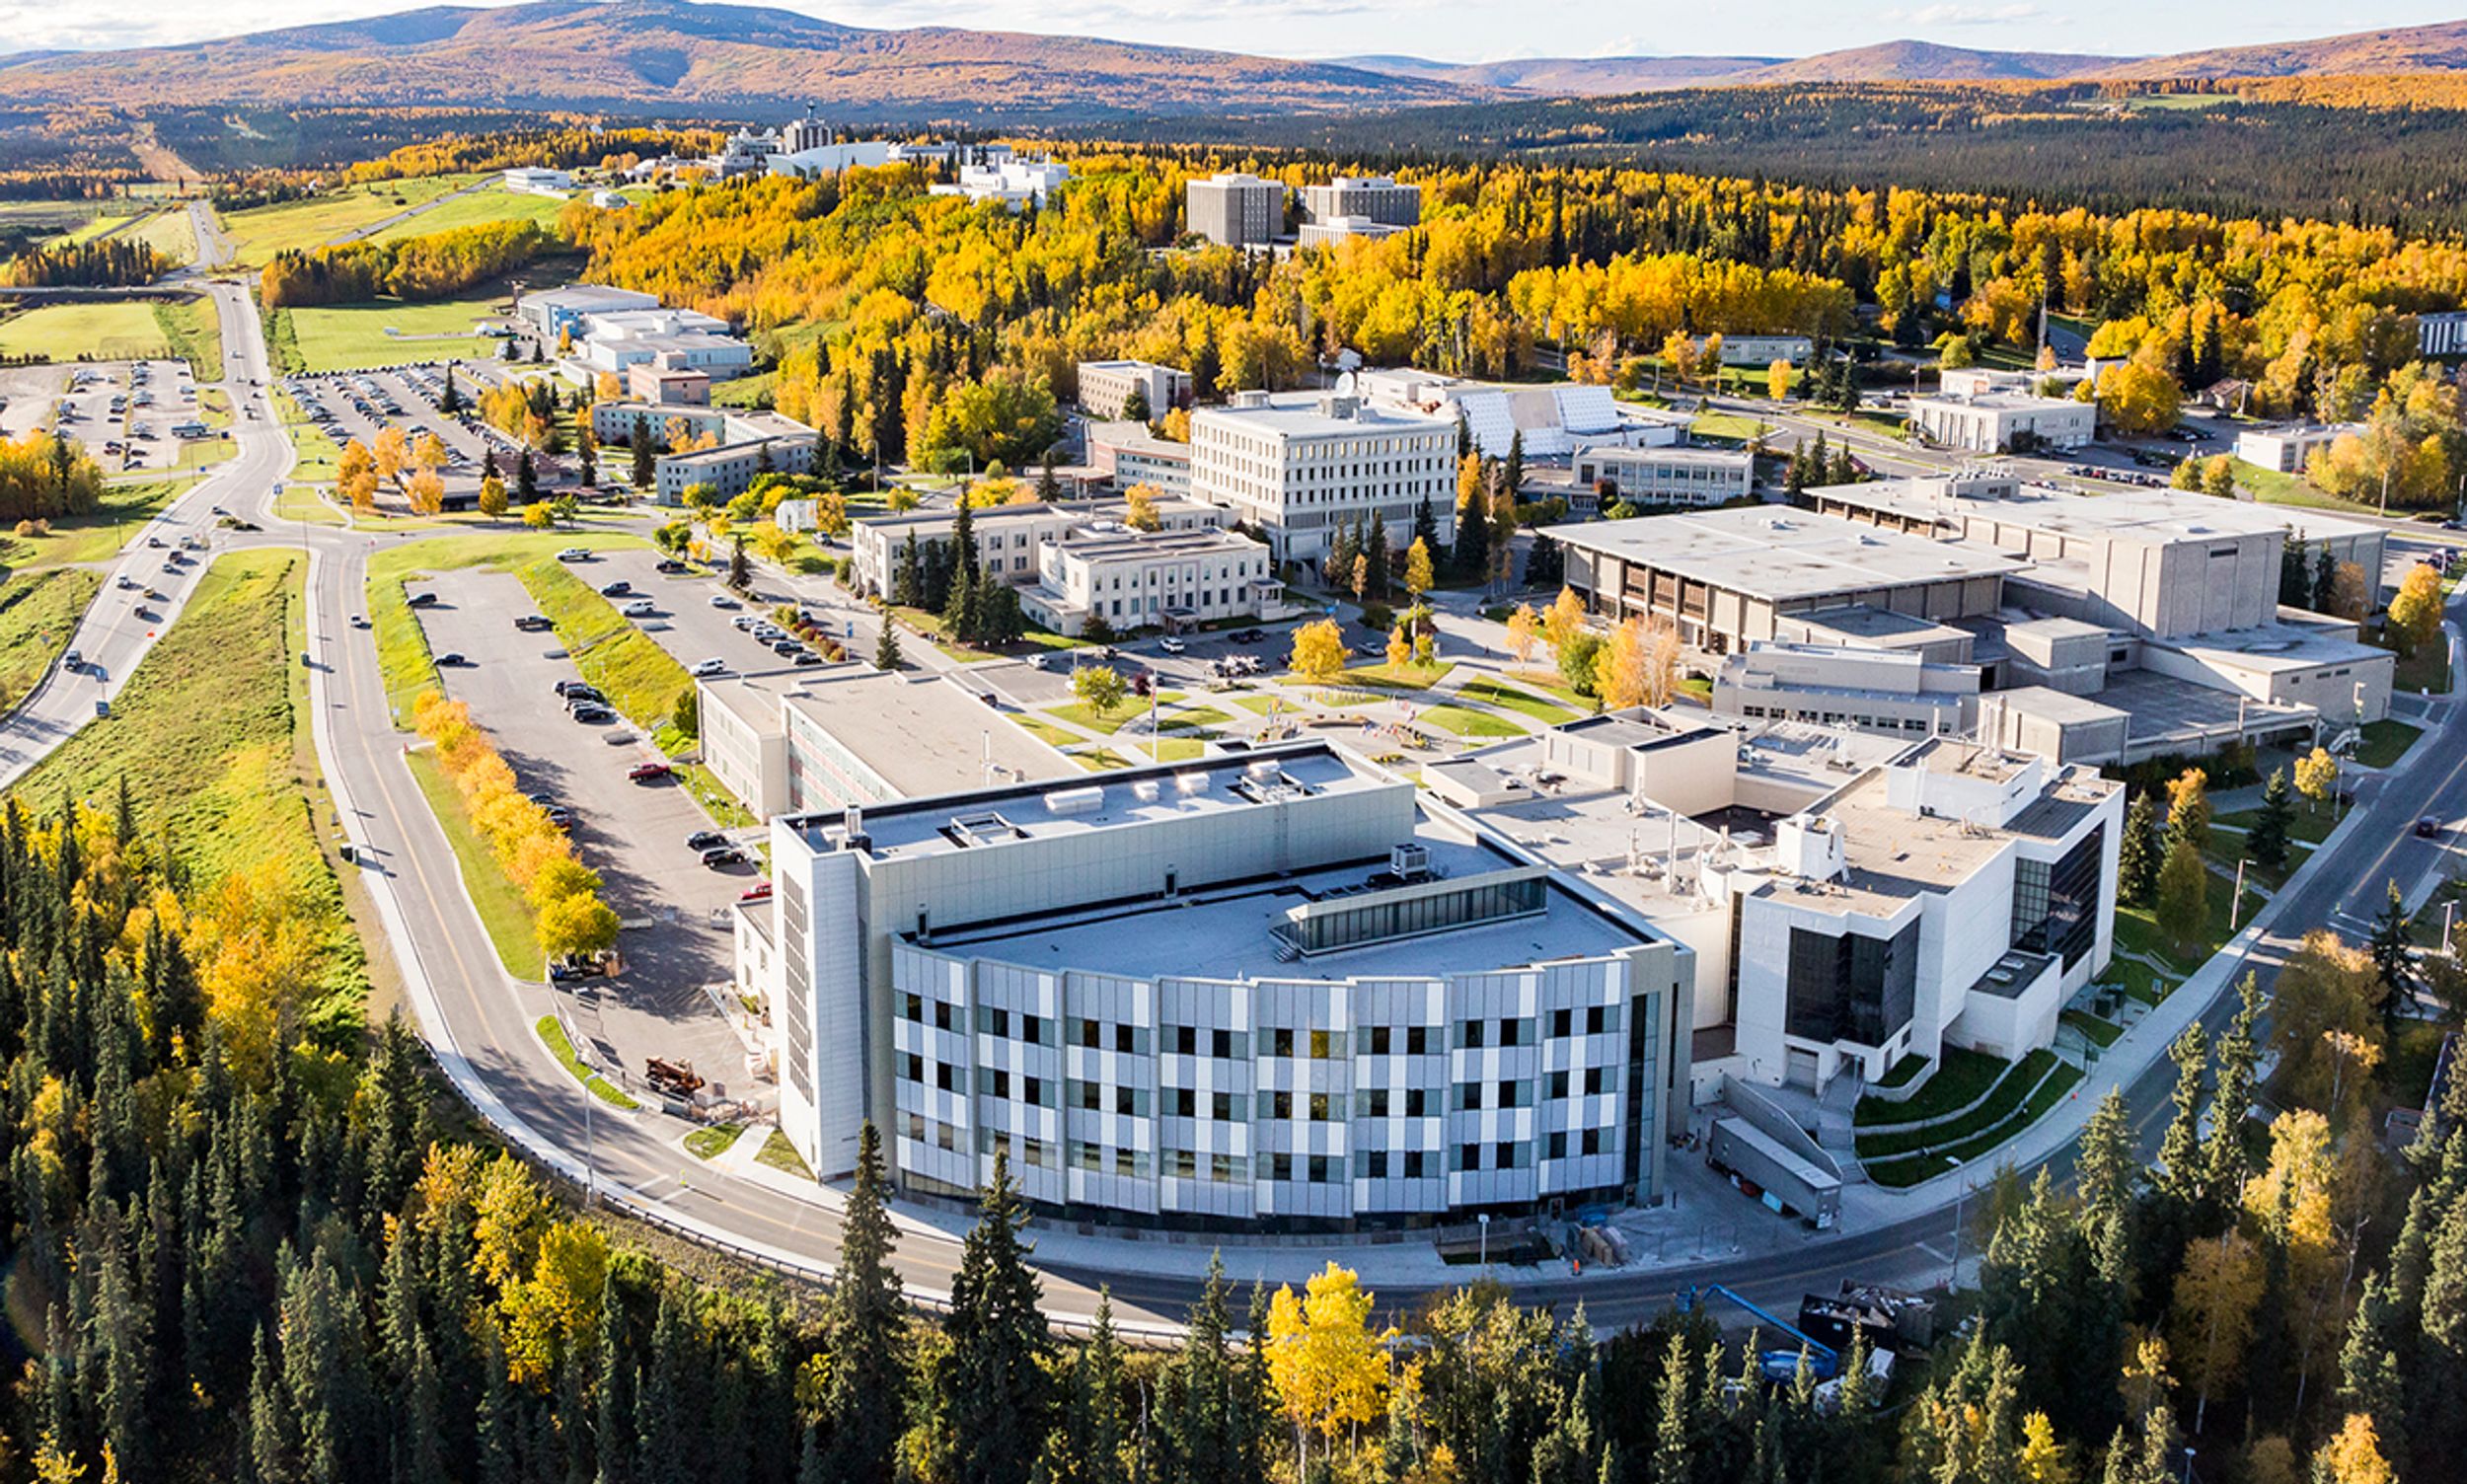 Aerial view of the University of Alaska Fairbanks showing the $150M engineering building which just opened a few years ago.